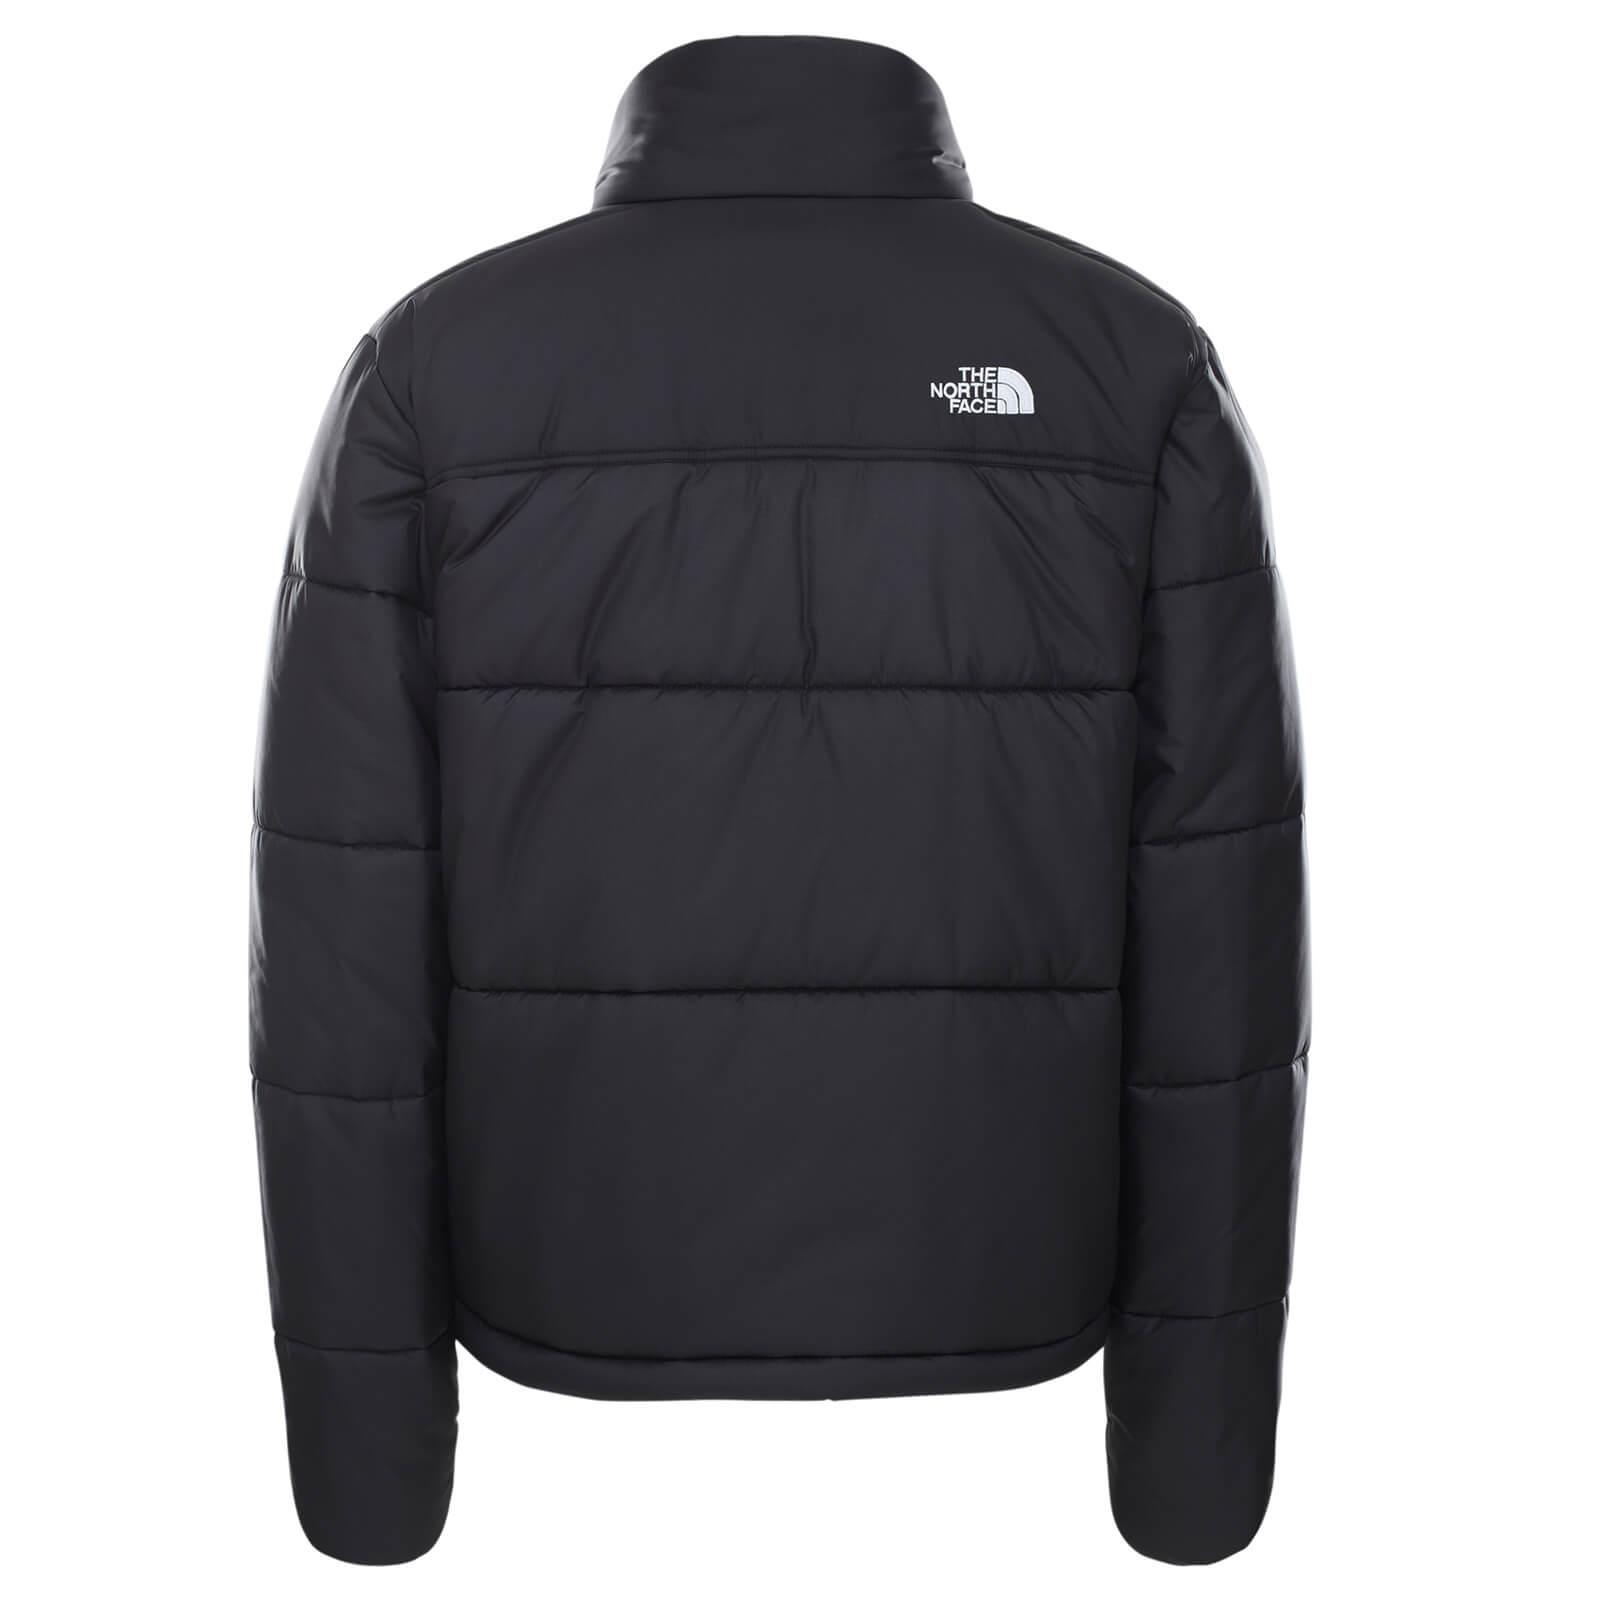 The North Face Synthetic Saikuru Jacket in Black for Men - Lyst